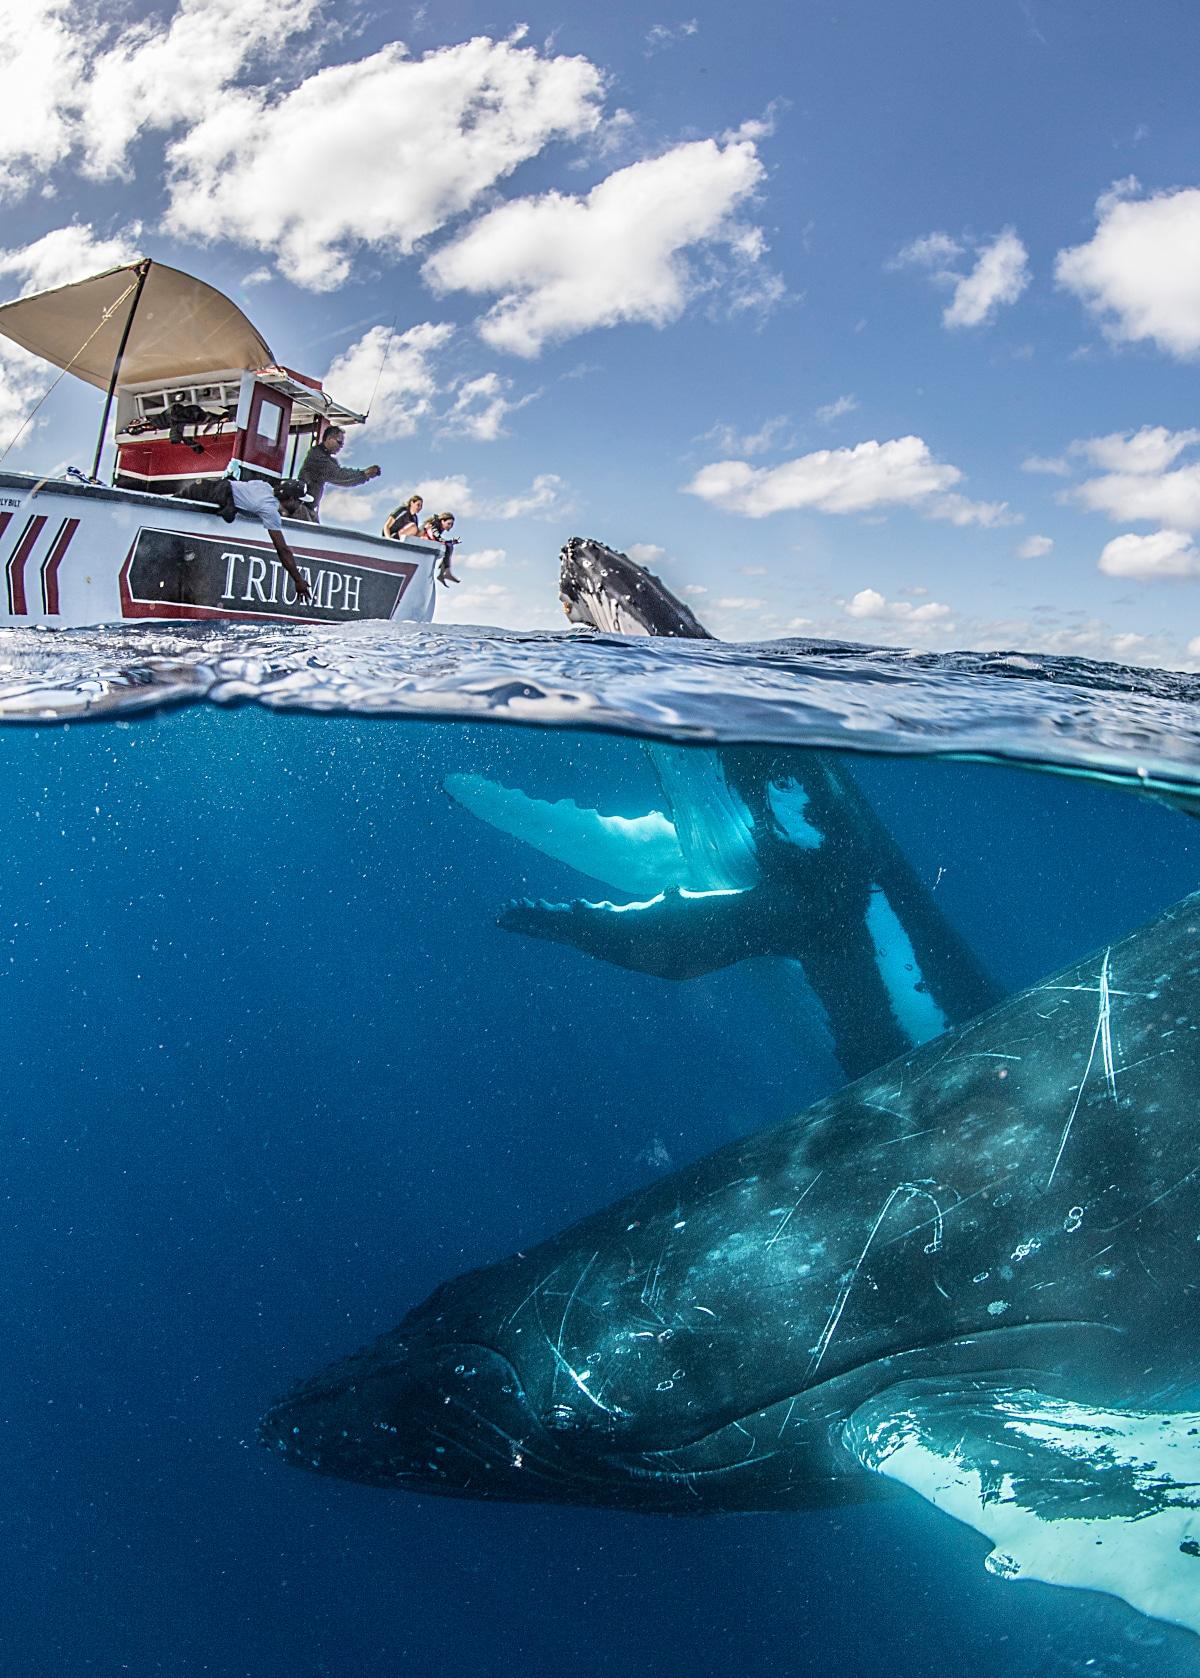 Two curious male humpbacks off the coast of Tonga. (Courtesy of <a href="https://www.instagram.com/mike_korostelev/">Mikhail Korostelev</a>)